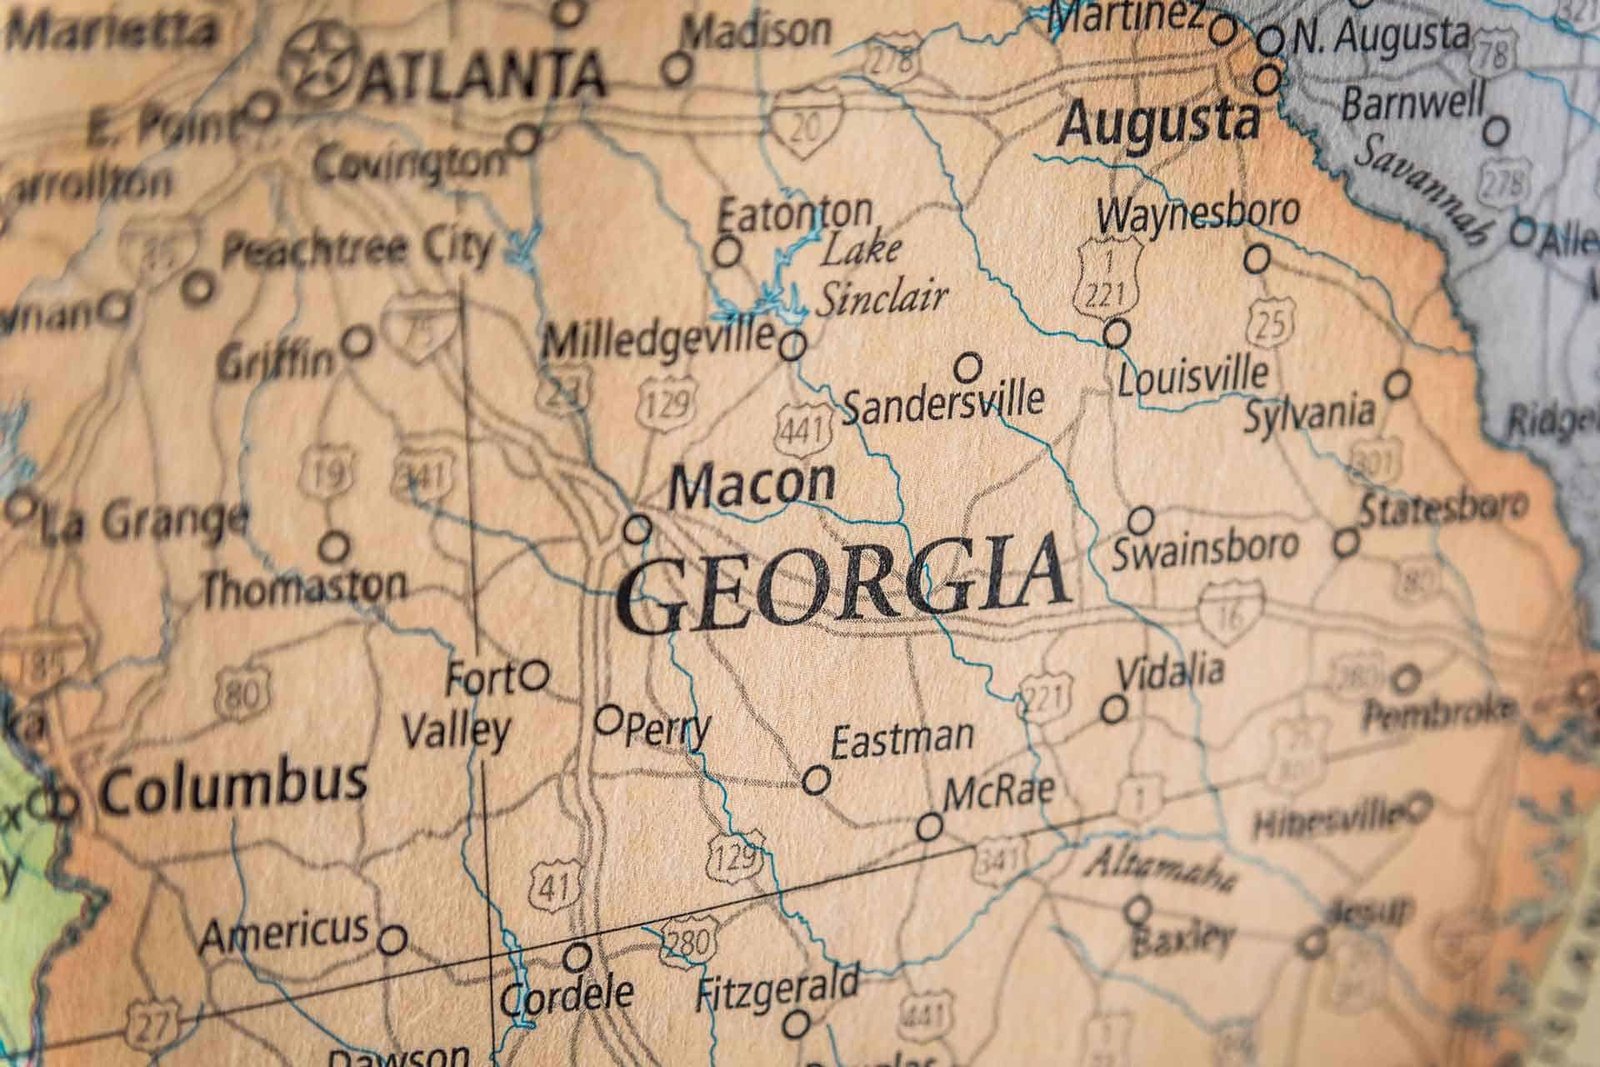 Closeup Selective Focus Of Georgia State On A Geographical And Political State Map Of The USA 